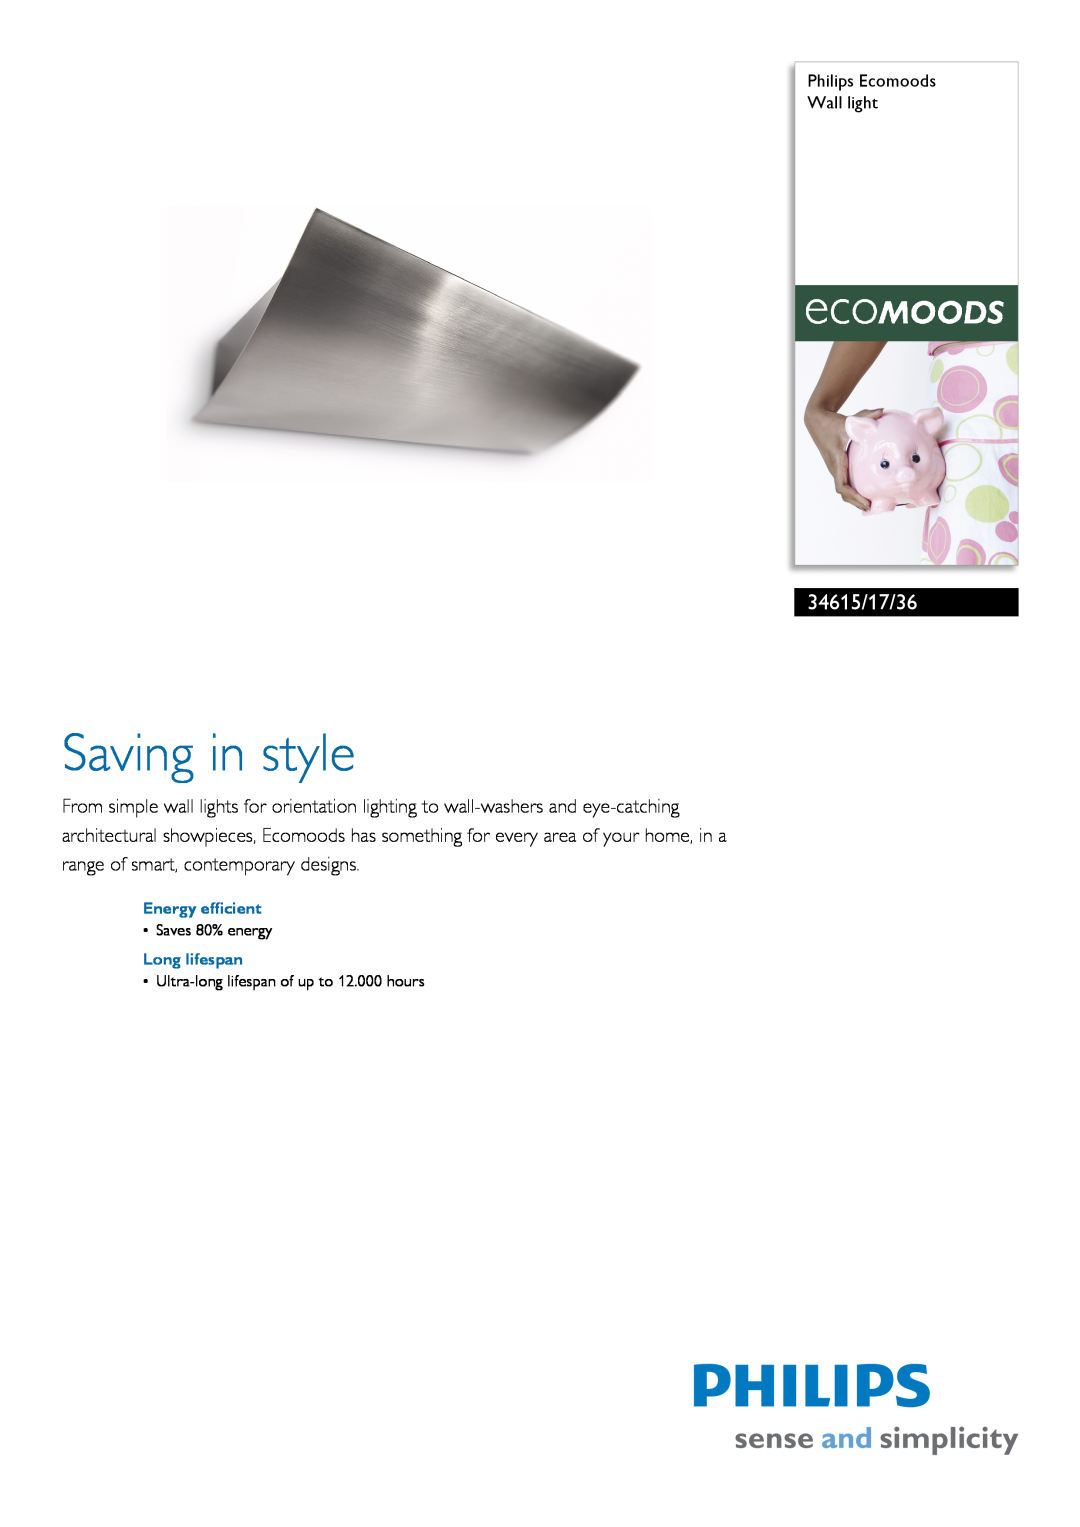 Philips 34615/17/36 manual Philips Ecomoods Wall light, Energy efficient, Long lifespan, Saving in style, Saves 80% energy 